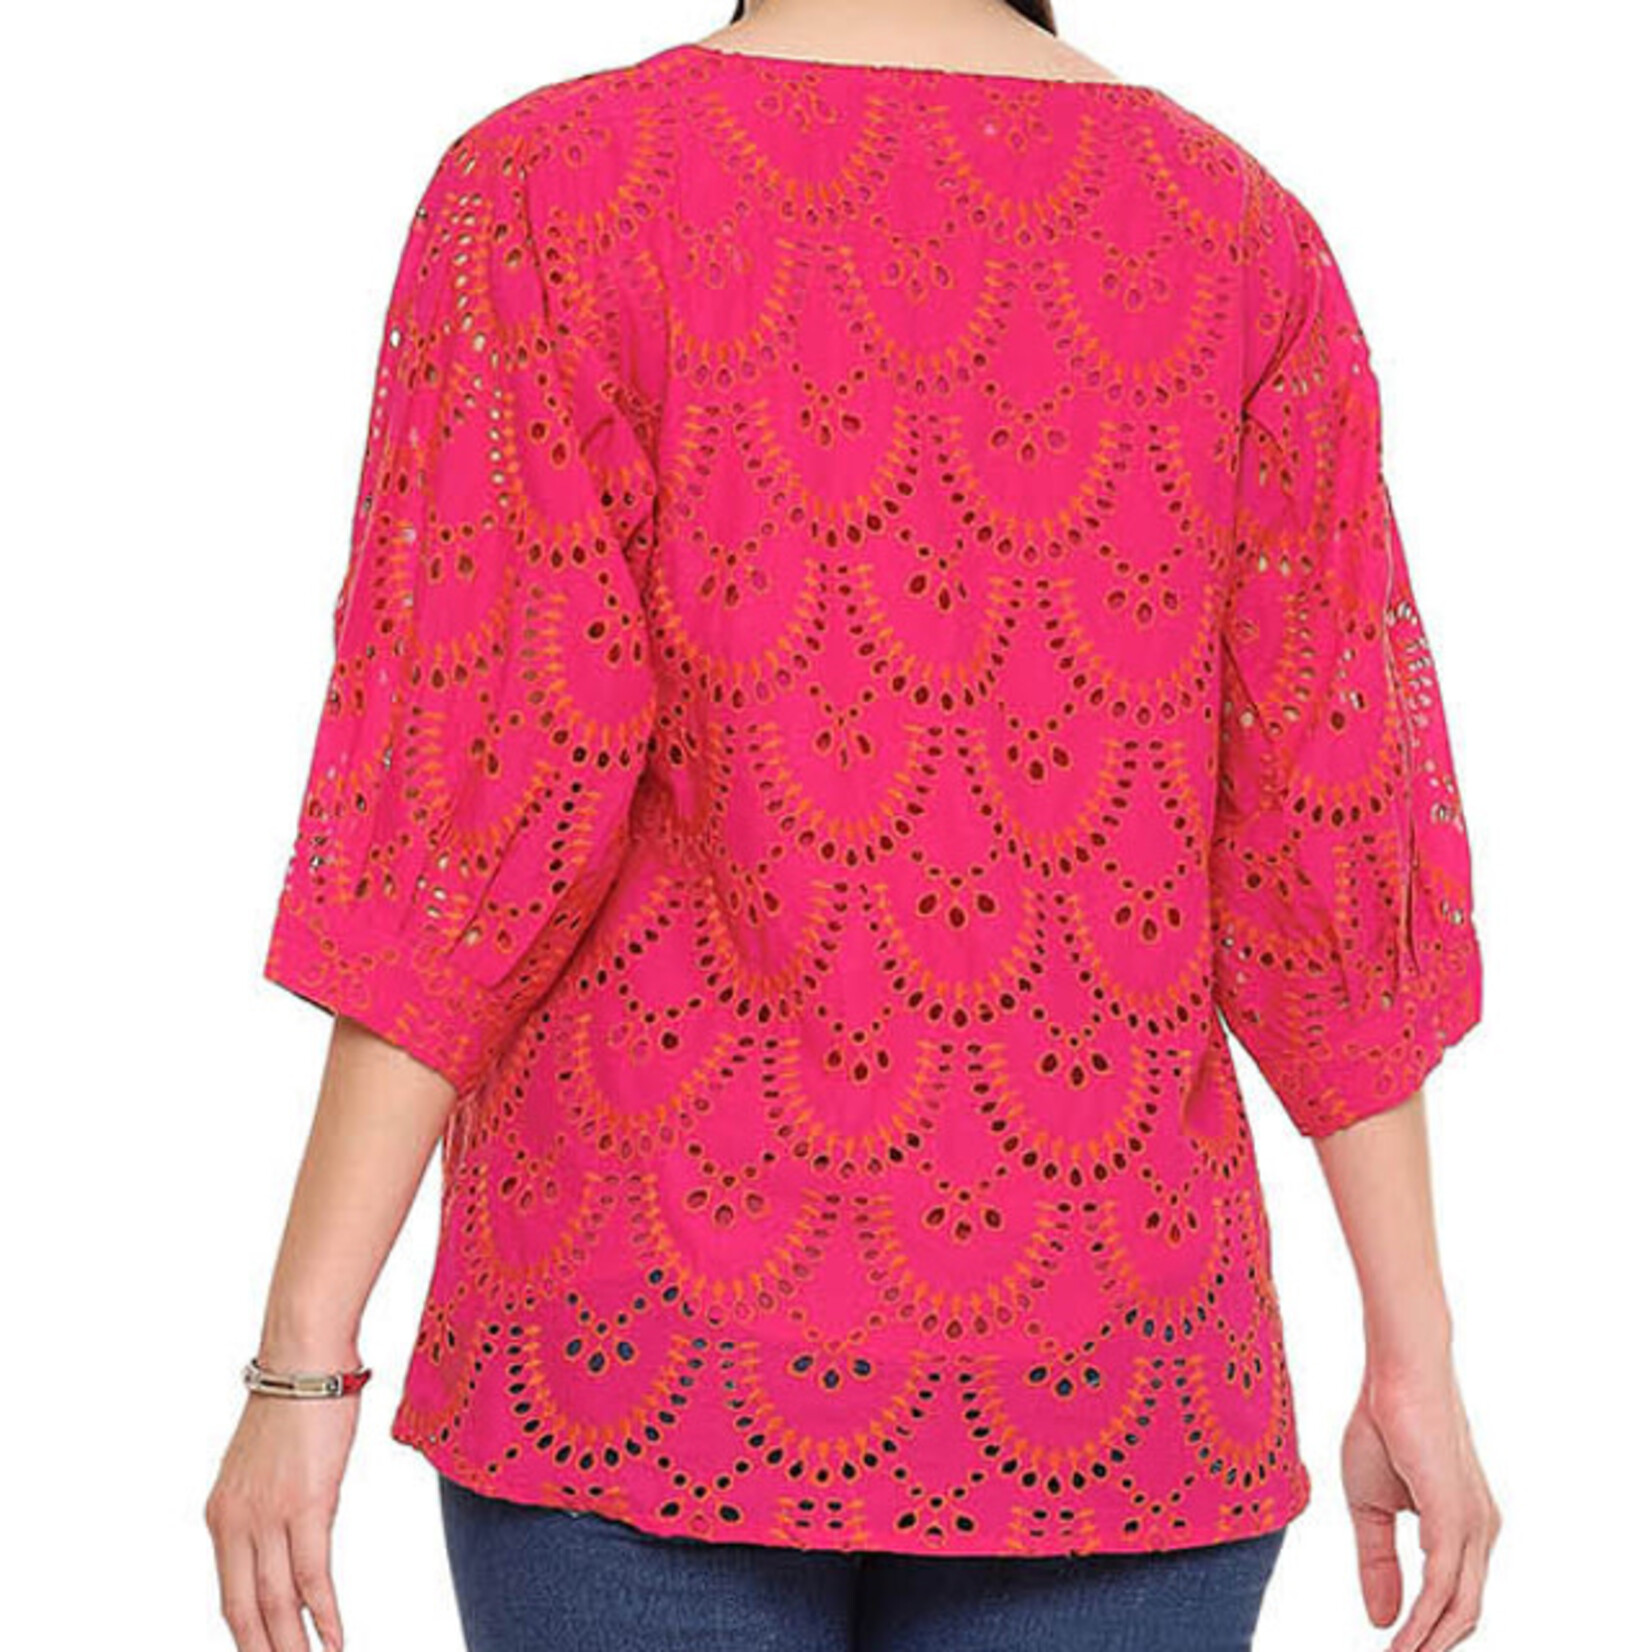 Parsley and Sage Fuchsia Eyelet Noreen Top